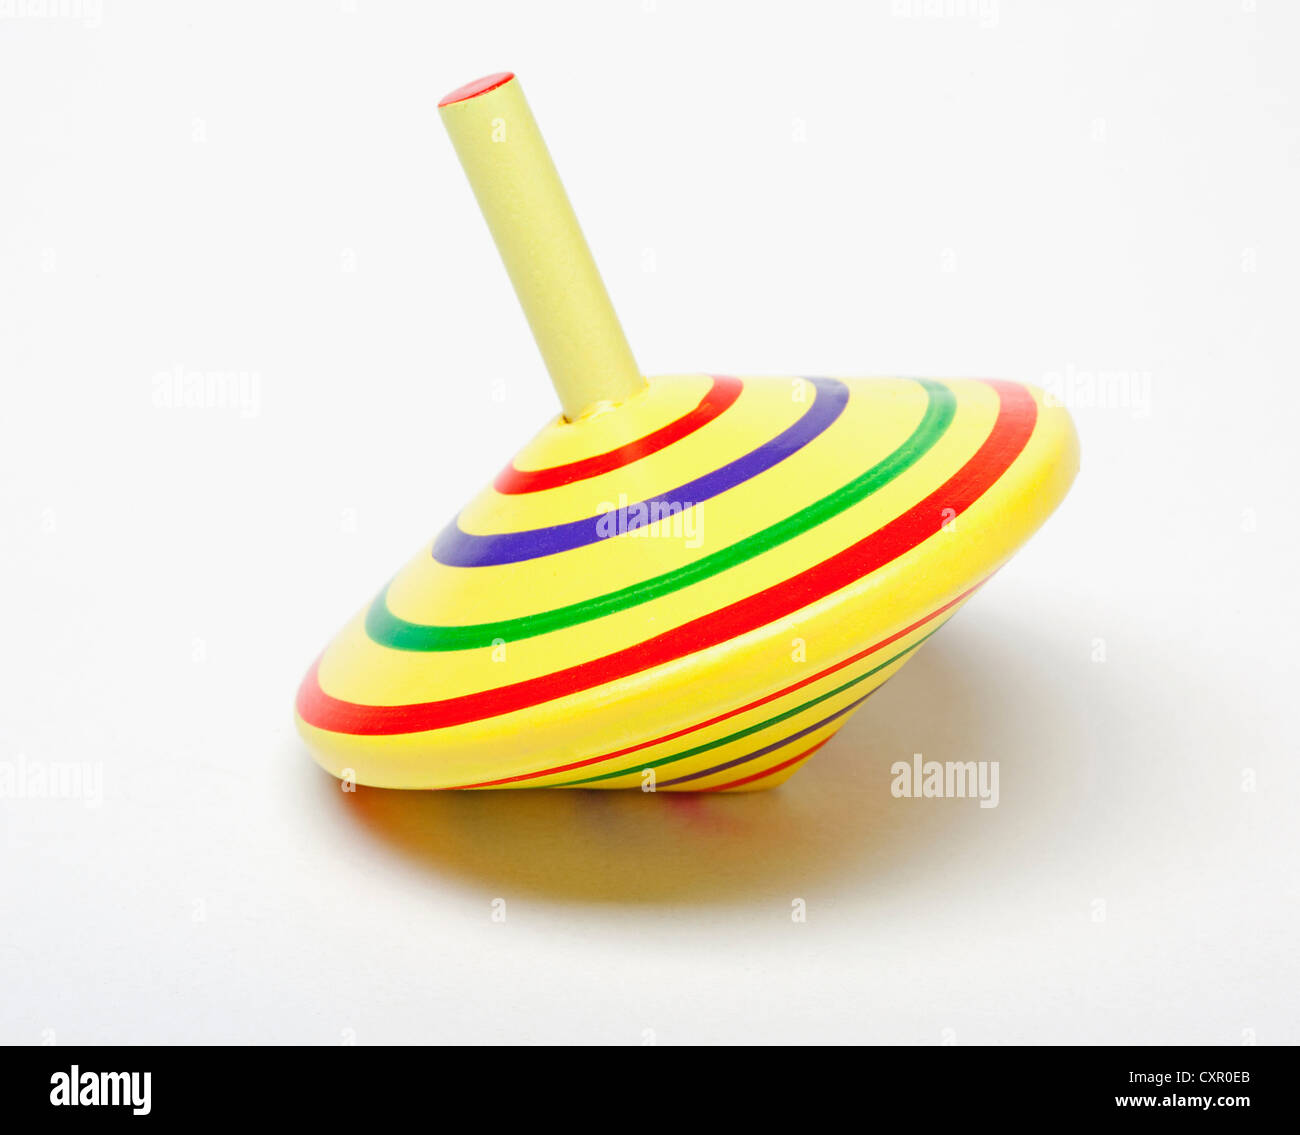 Spinning Top High Resolution Stock Photography and Images - Alamy